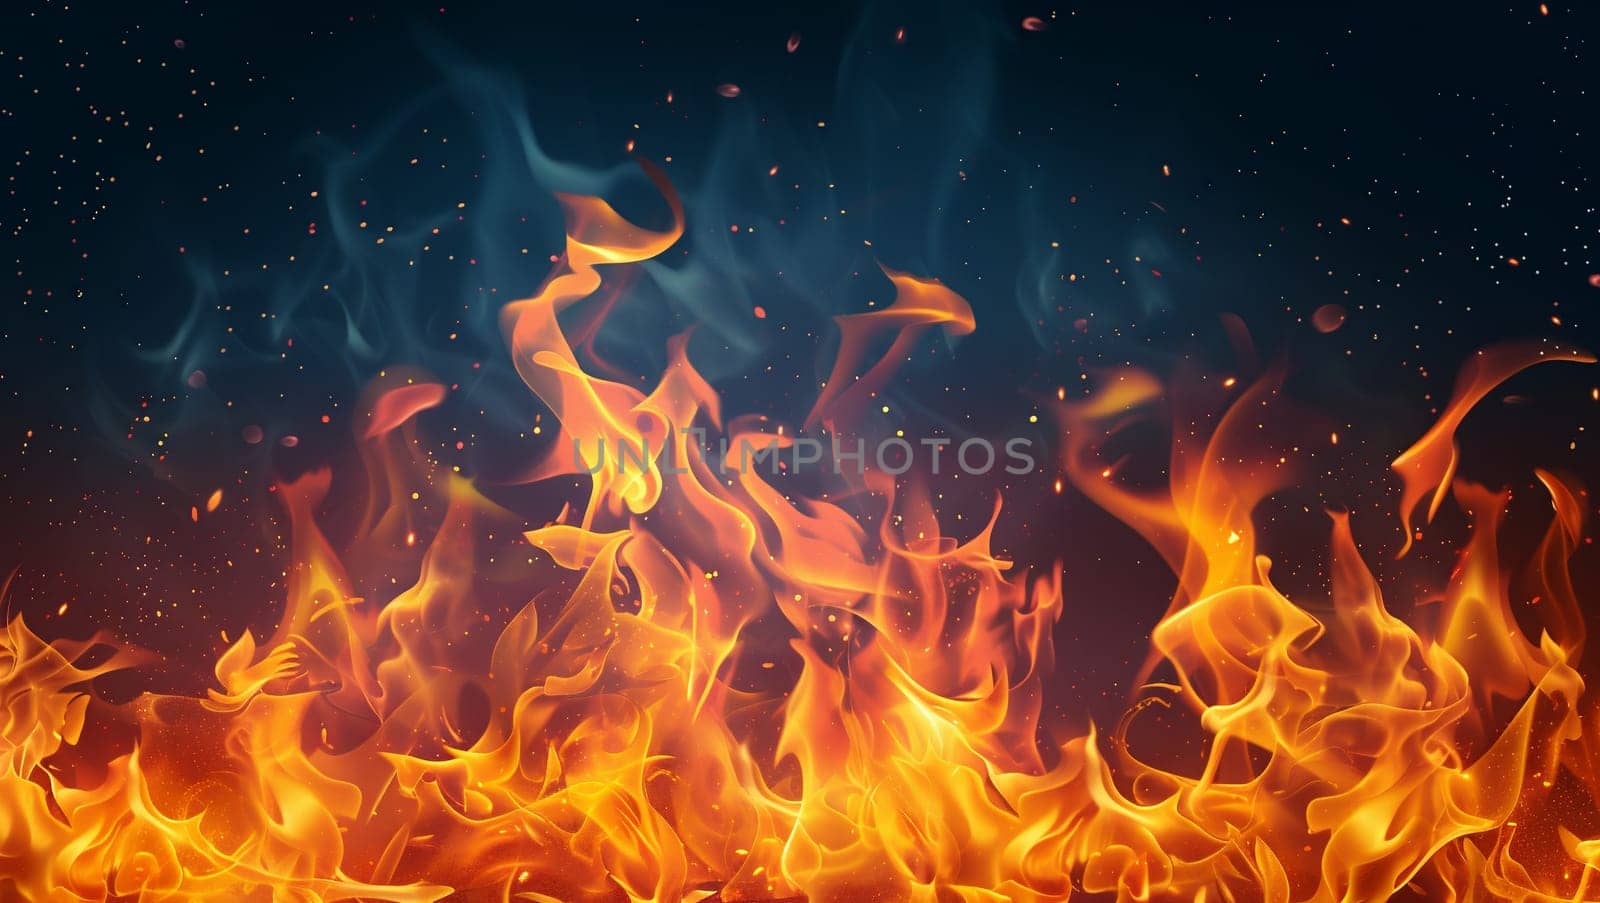 Fire background with flames. Hot image of a blazing fire. High quality photo